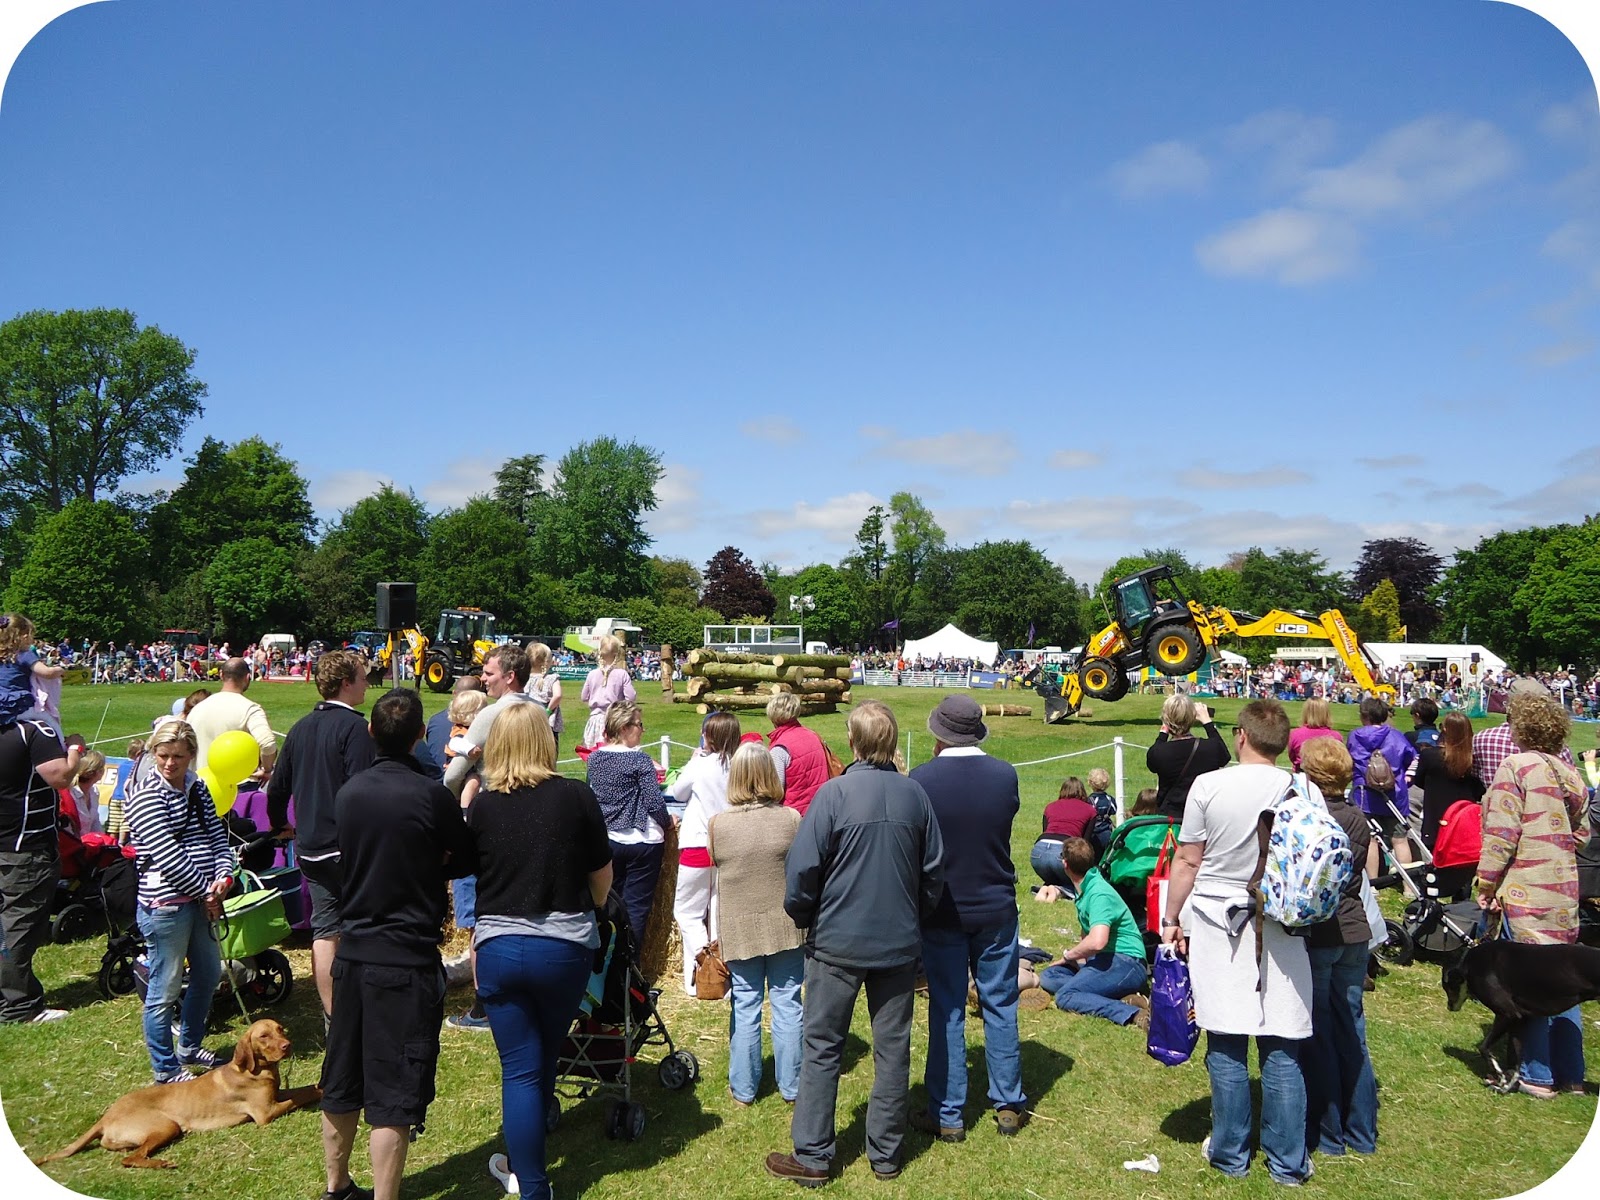 Win a Family Ticket to Tractor Ted's Big Machines Weekend at Bowood House